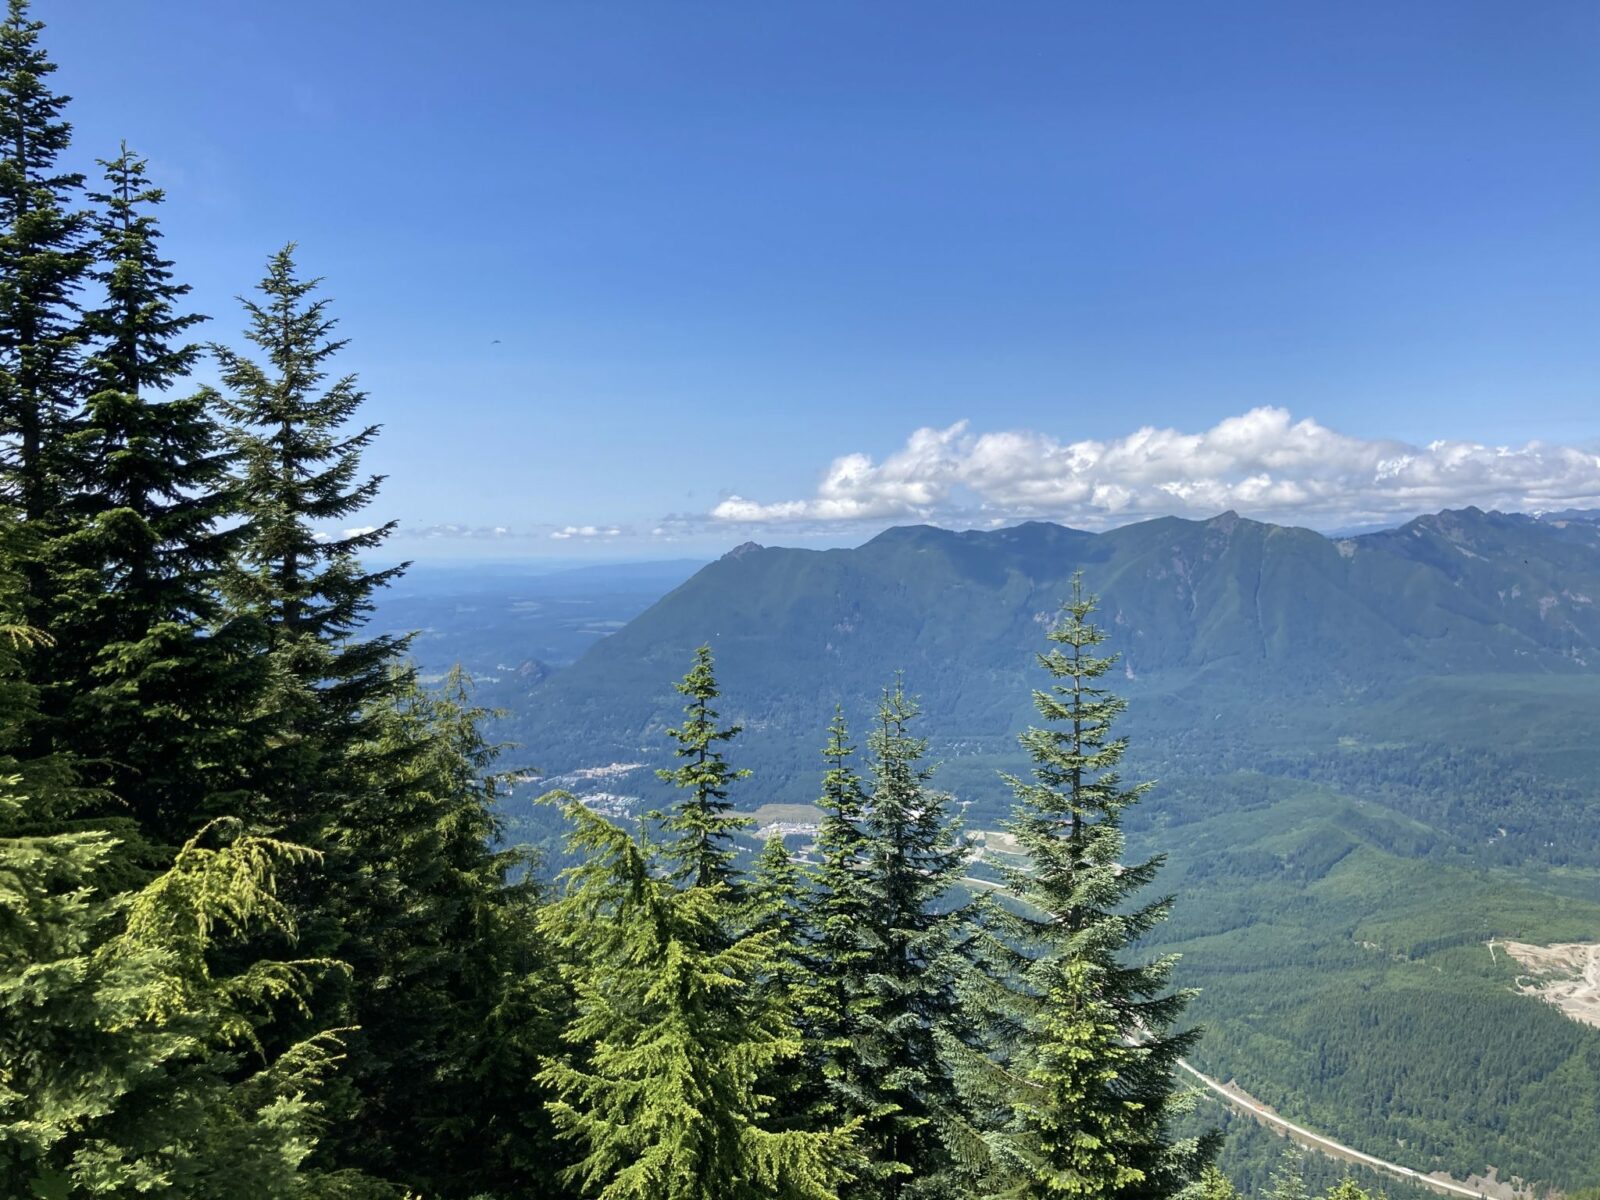 View from Mt Washington of the Snoqualmie Valley and North Bend and Mt Si in the distance. Mt Si is a forested high mountain with many others around it. Tere are evergreen trees in the foreground